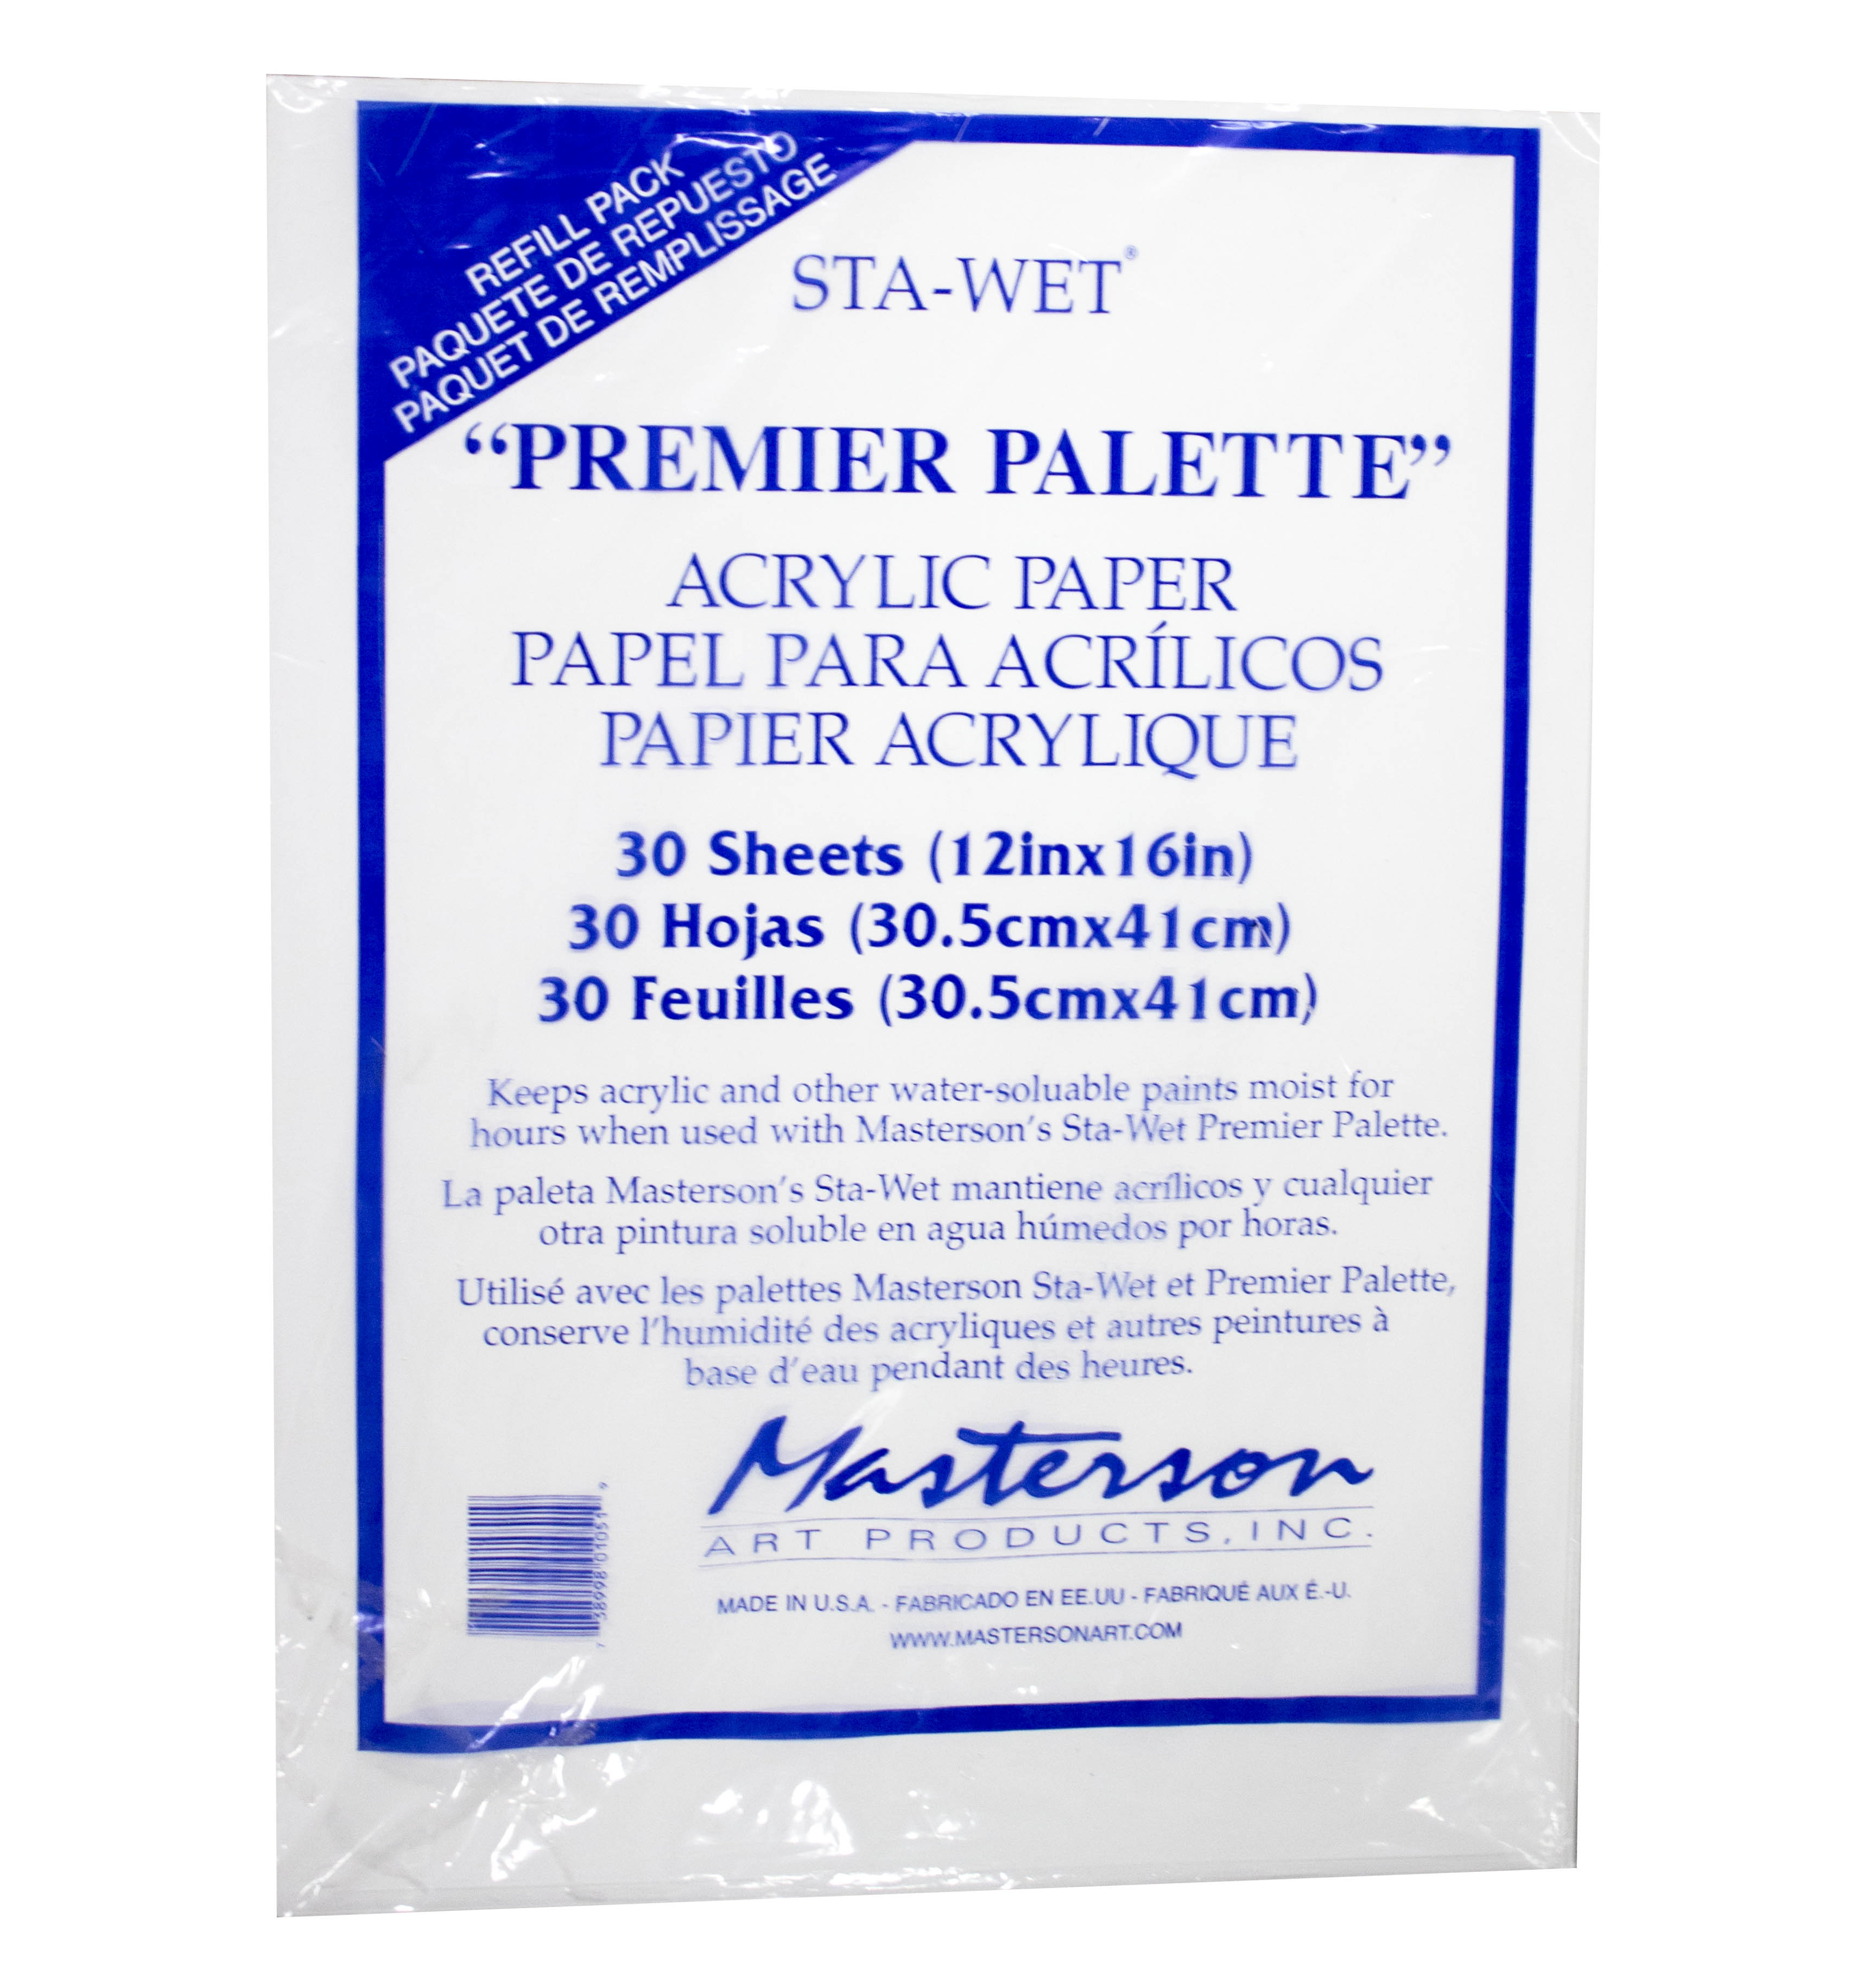 Masterson Sta-Wet "Premier Palette" Acrylic Paper Refill – 30 Sheets – 12 x 16 in.